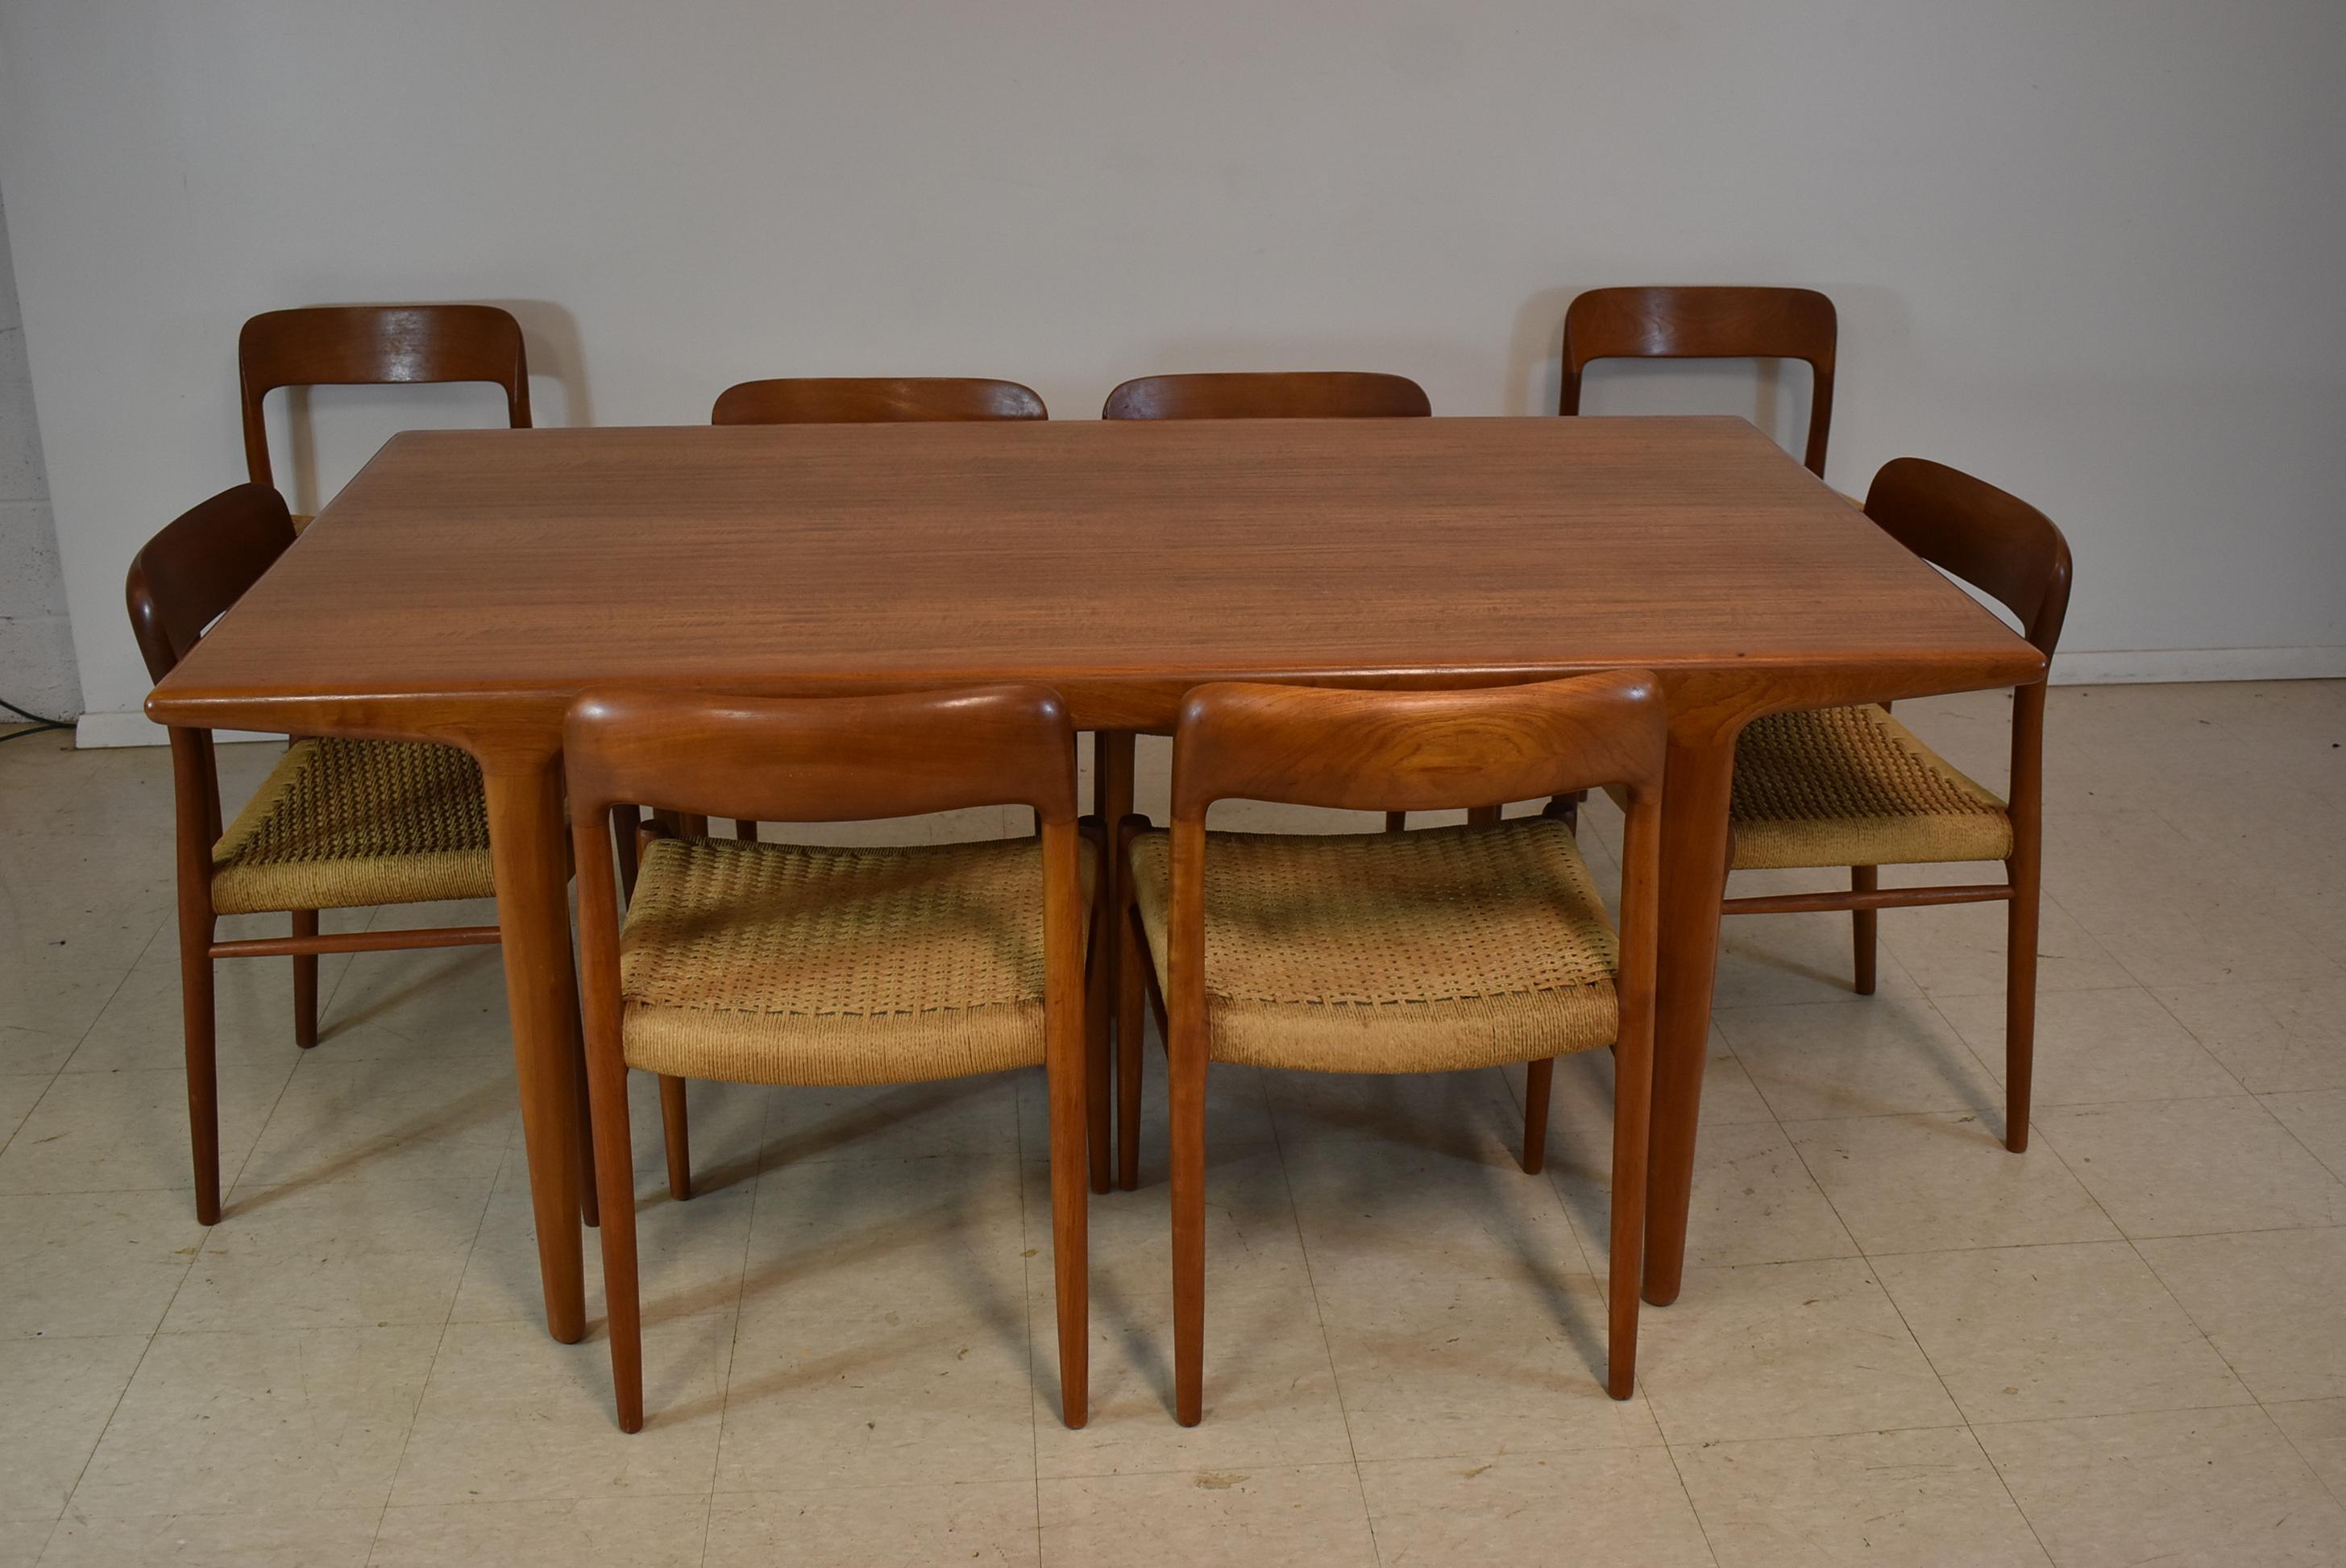 Mid-Century Modern Niels Moller teak tale with eight chairs. Rush seats. Table has two leaves and extends to 104